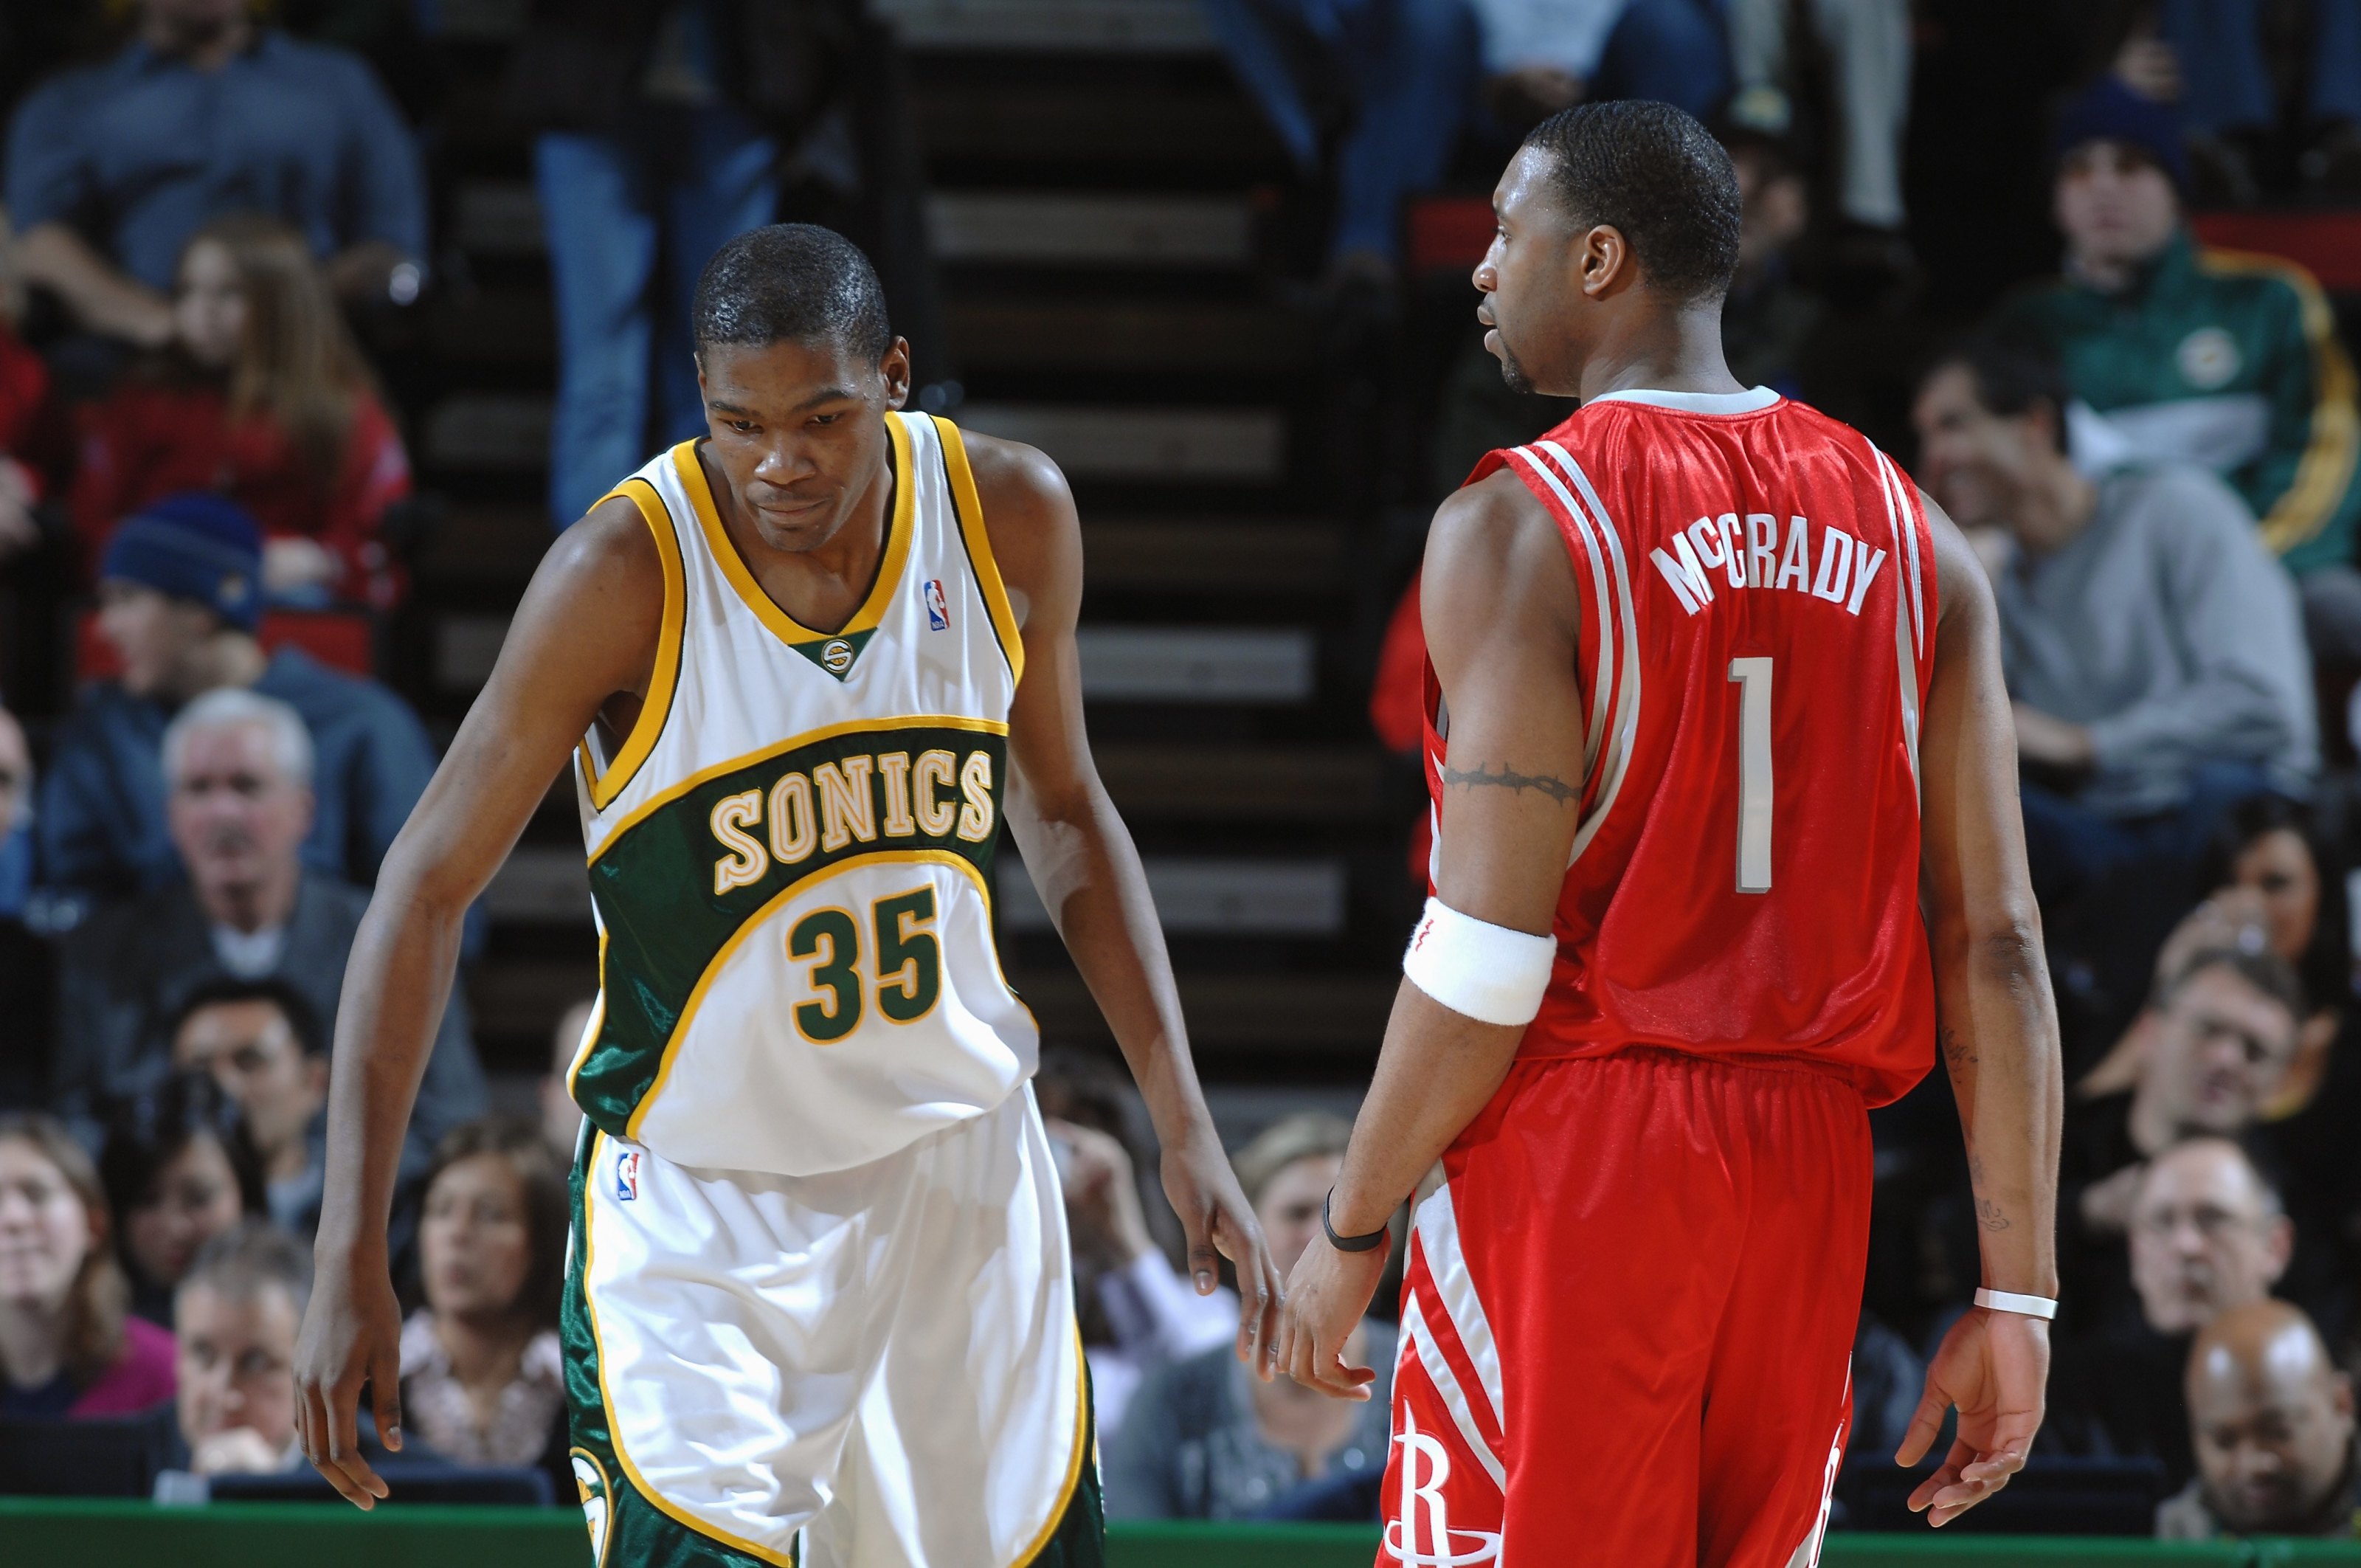 Who wins in a 1-on-1 matchup of Tracy McGrady vs. Kevin Durant?